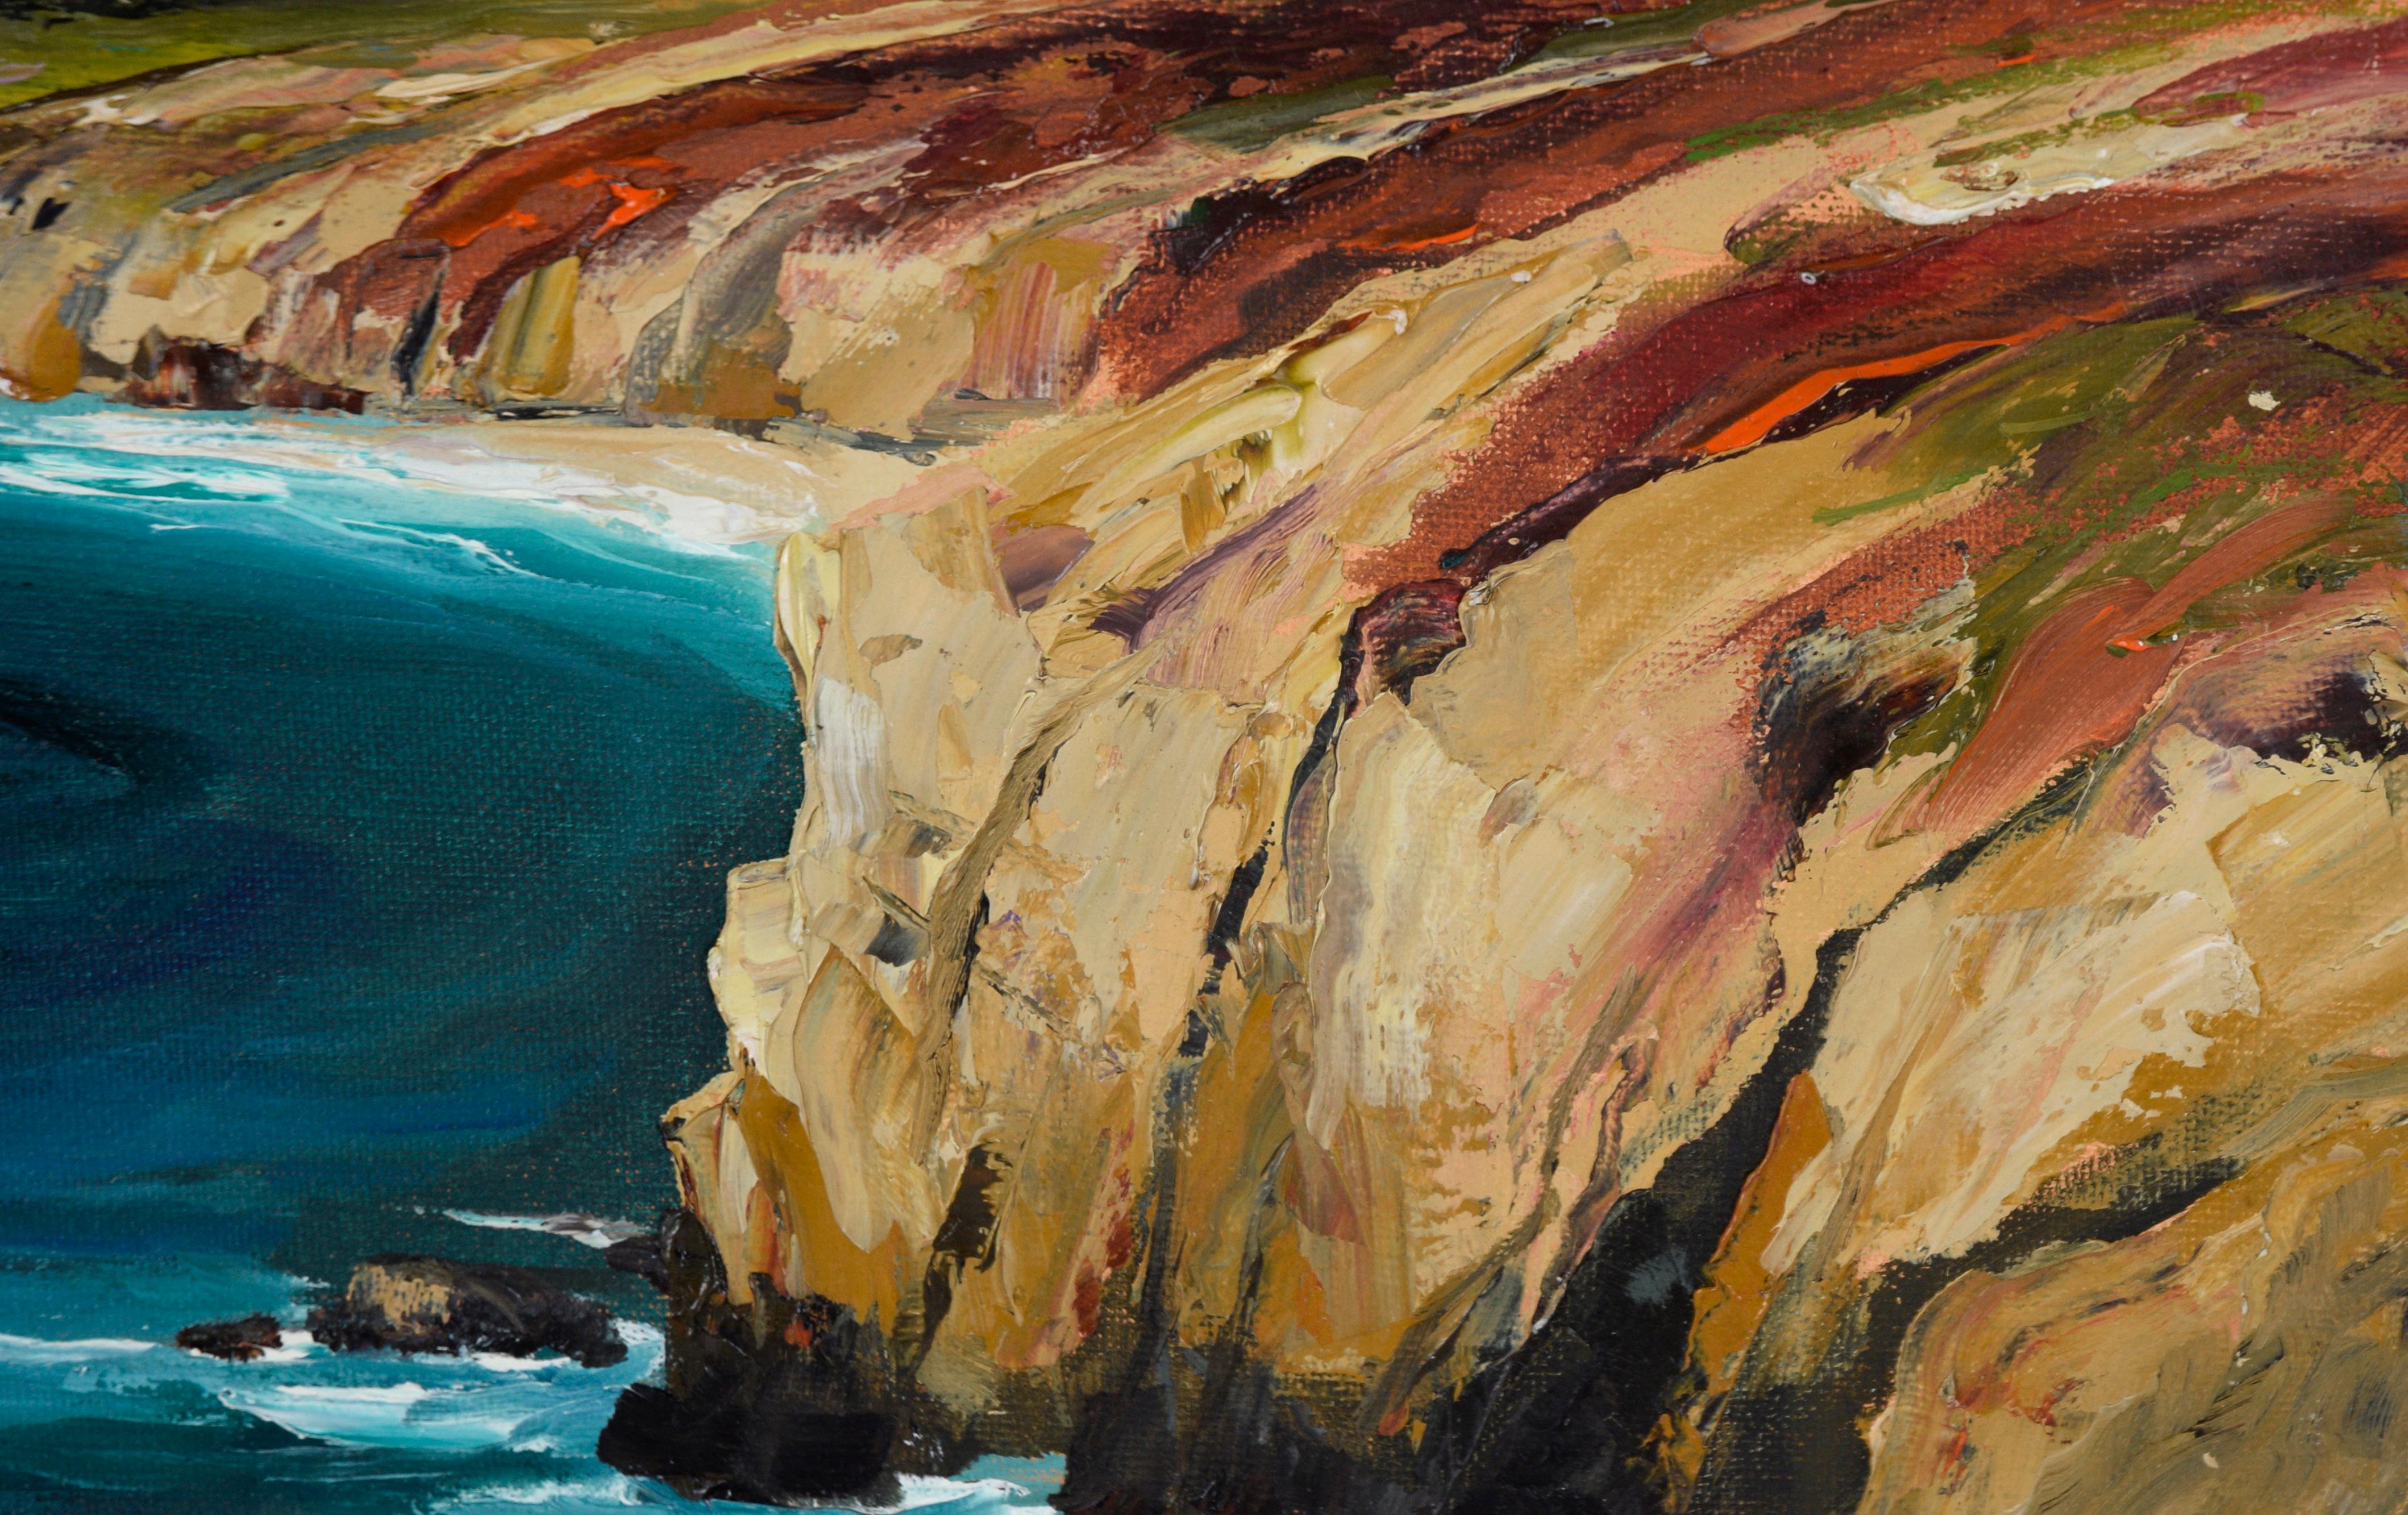 Coastal Cliffs and Lush Valley - Pacific Coast Big Sur Seascape in Oil on Canvas - American Impressionist Painting by Kathleen Murray